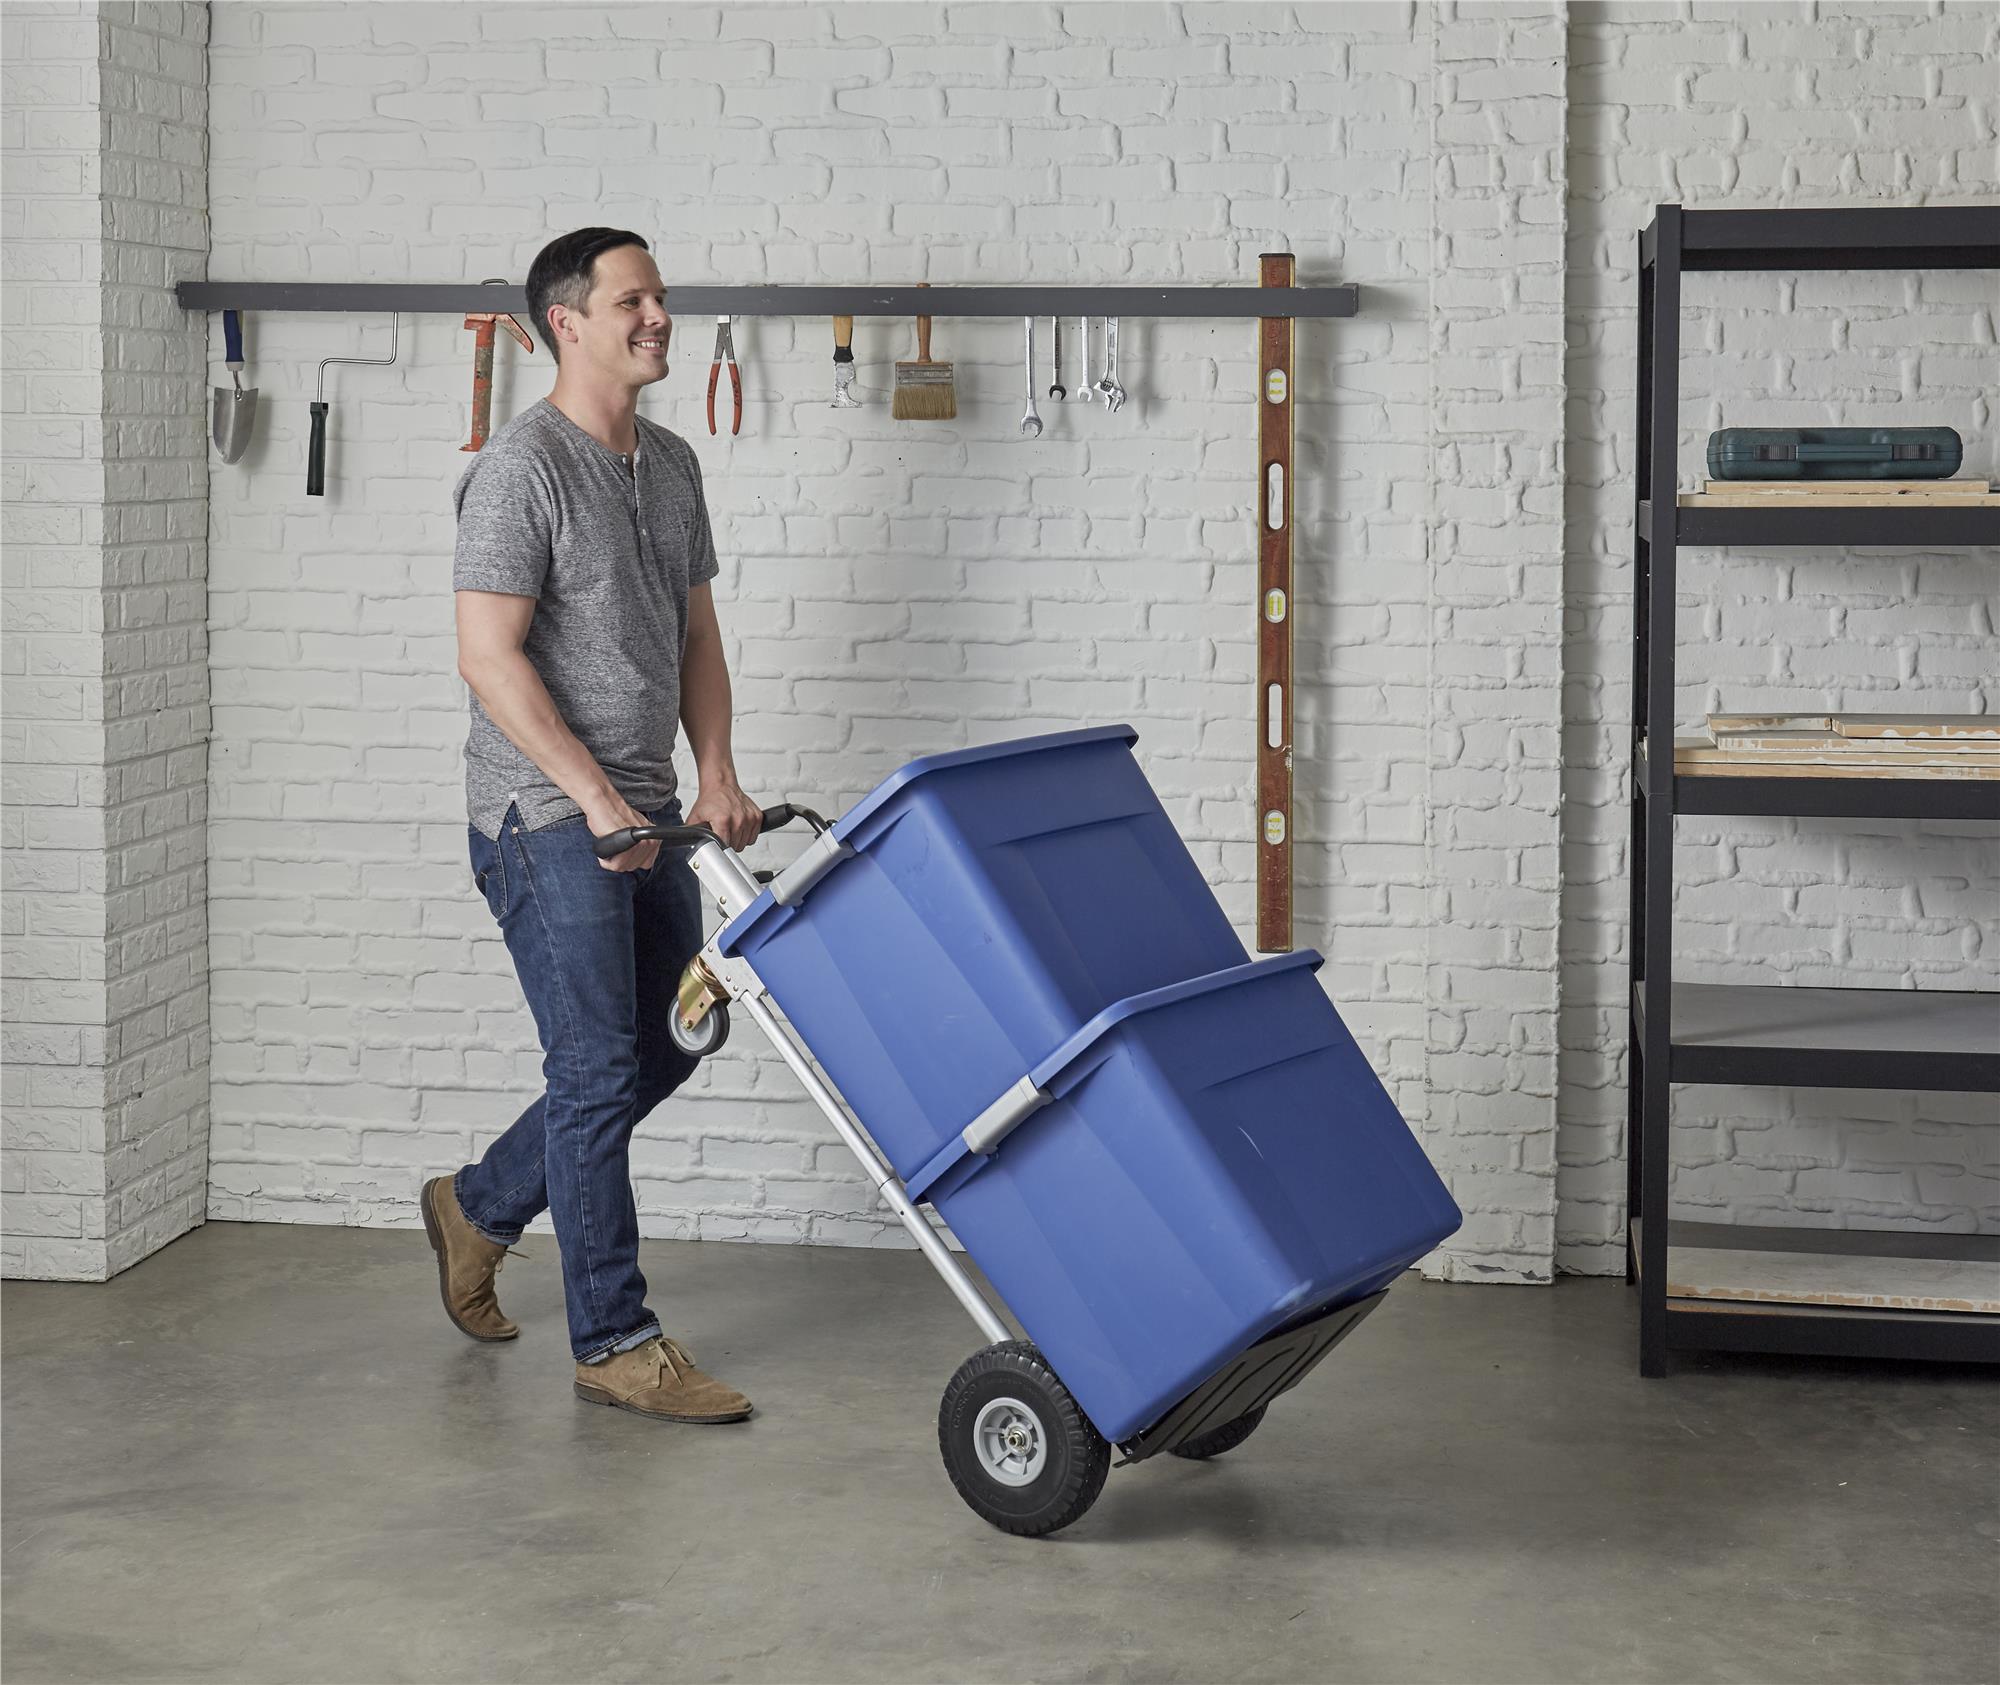 How To Use Moving Crates and Dollies (or Hand Truck)